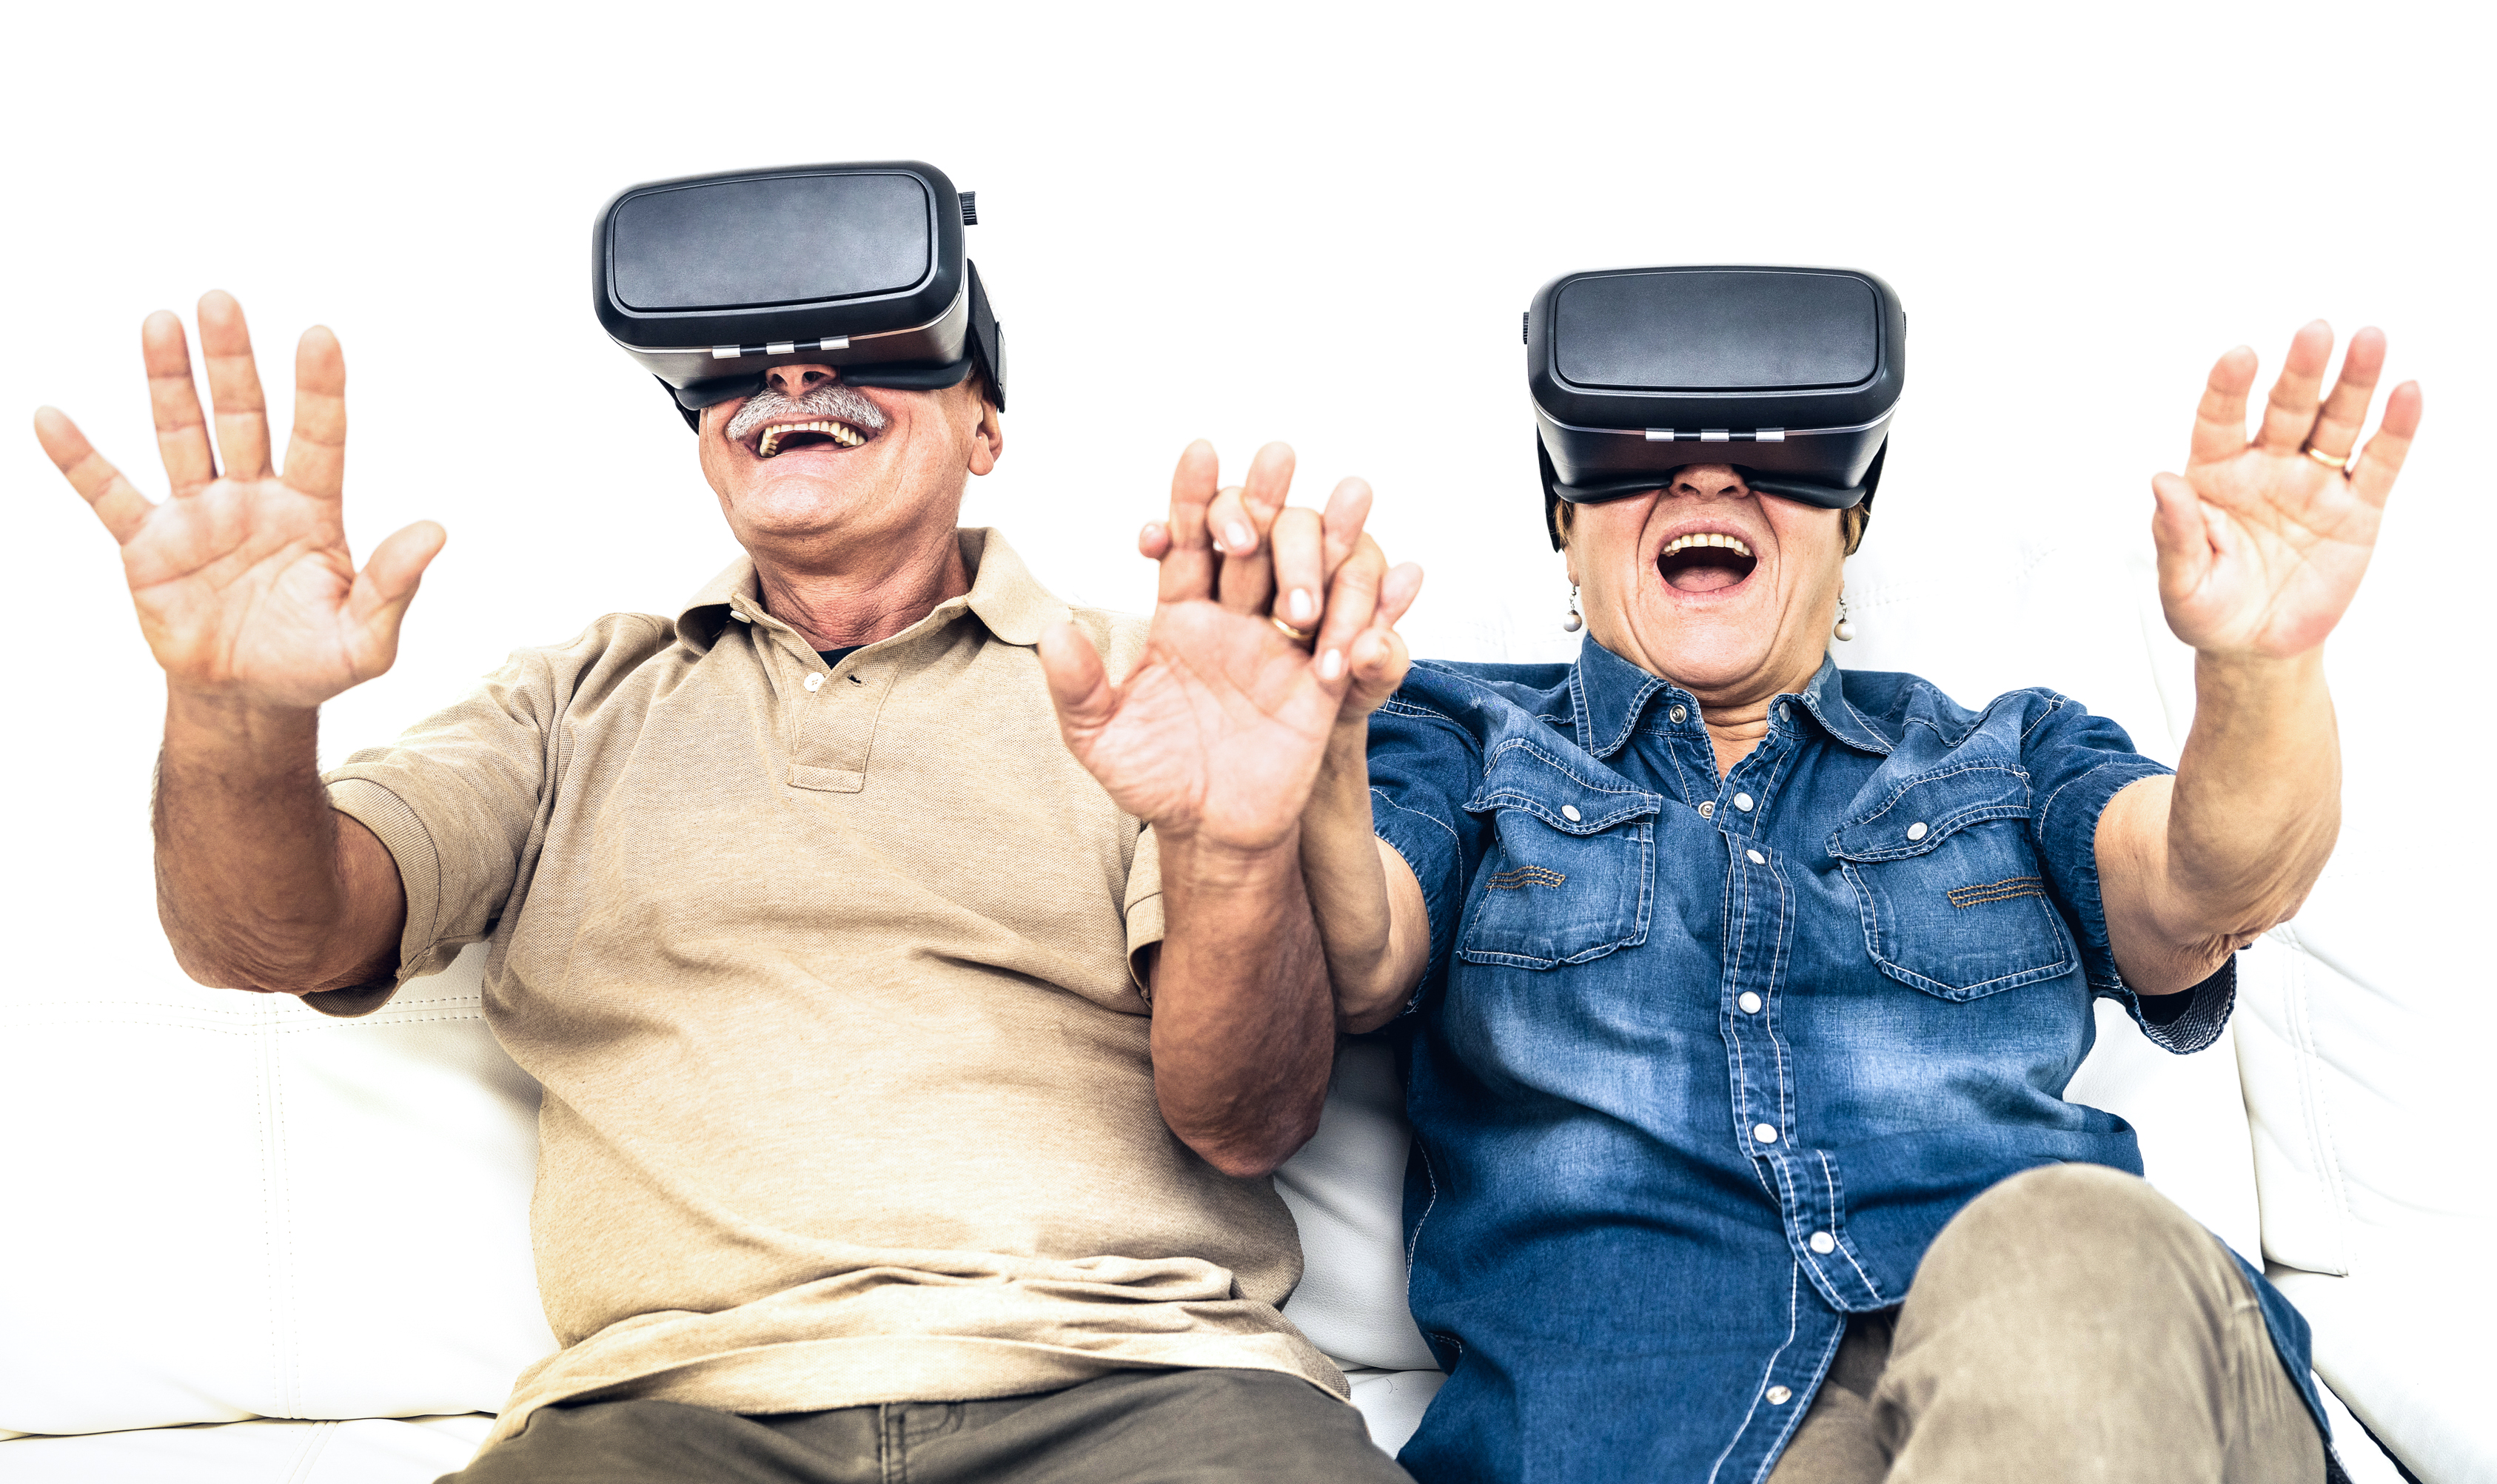 Senior mature couple having fun together with virtual reality headset sitting on sofa - Happy retired people using modern vr goggle glasses - New trends and technology concept and funny active elderly